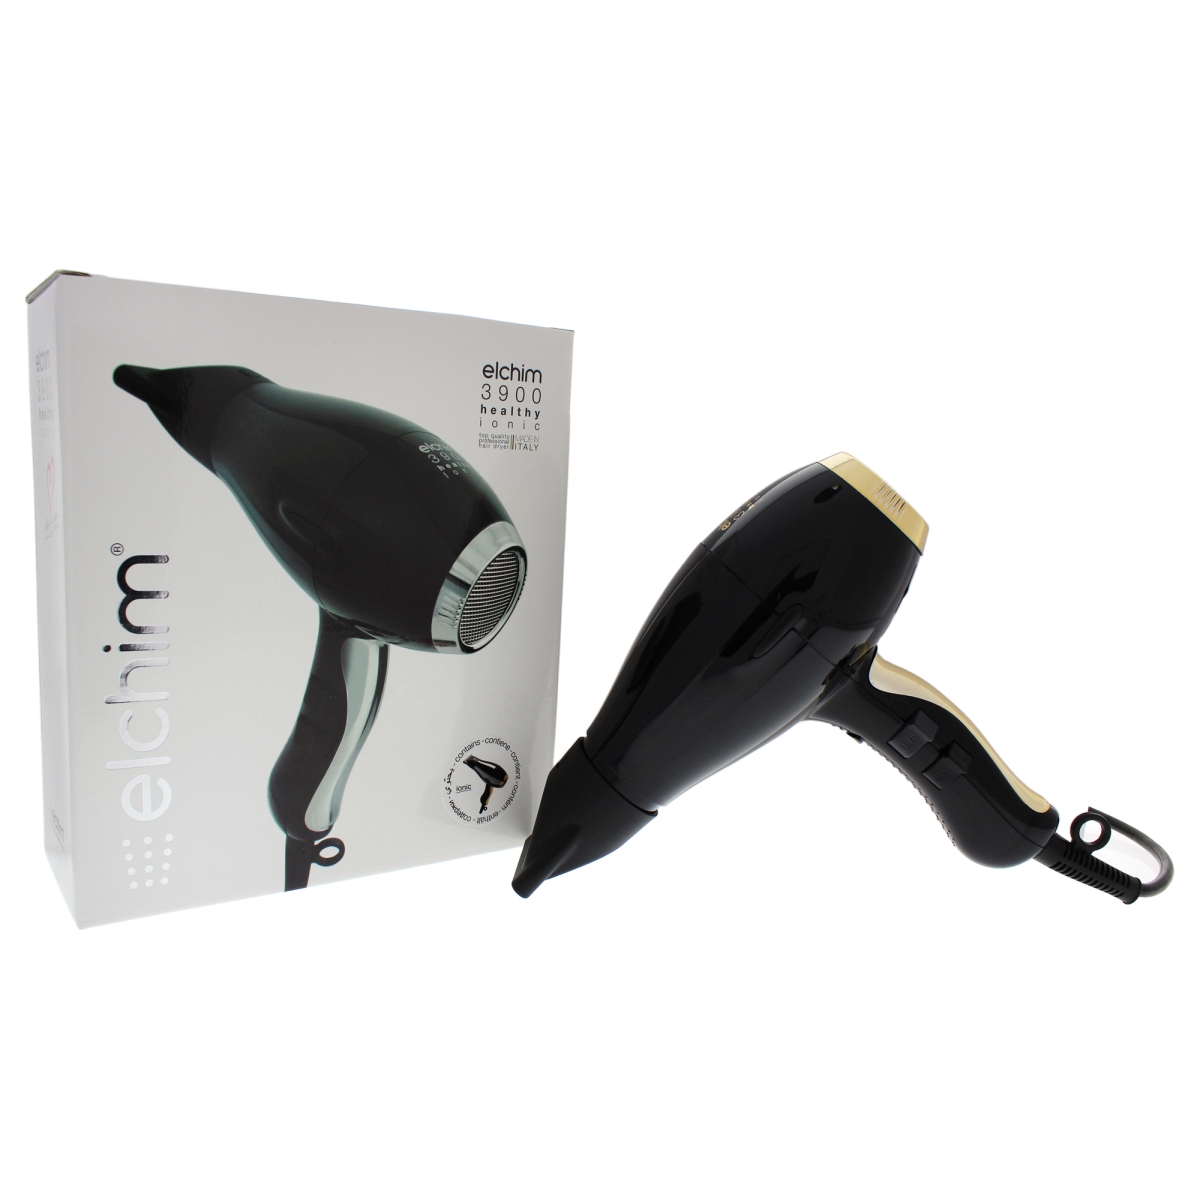 Picture of Elchim U-HC-11881 3900 Healthy Ionic Hair Dryer for Unisex - Black & Gold